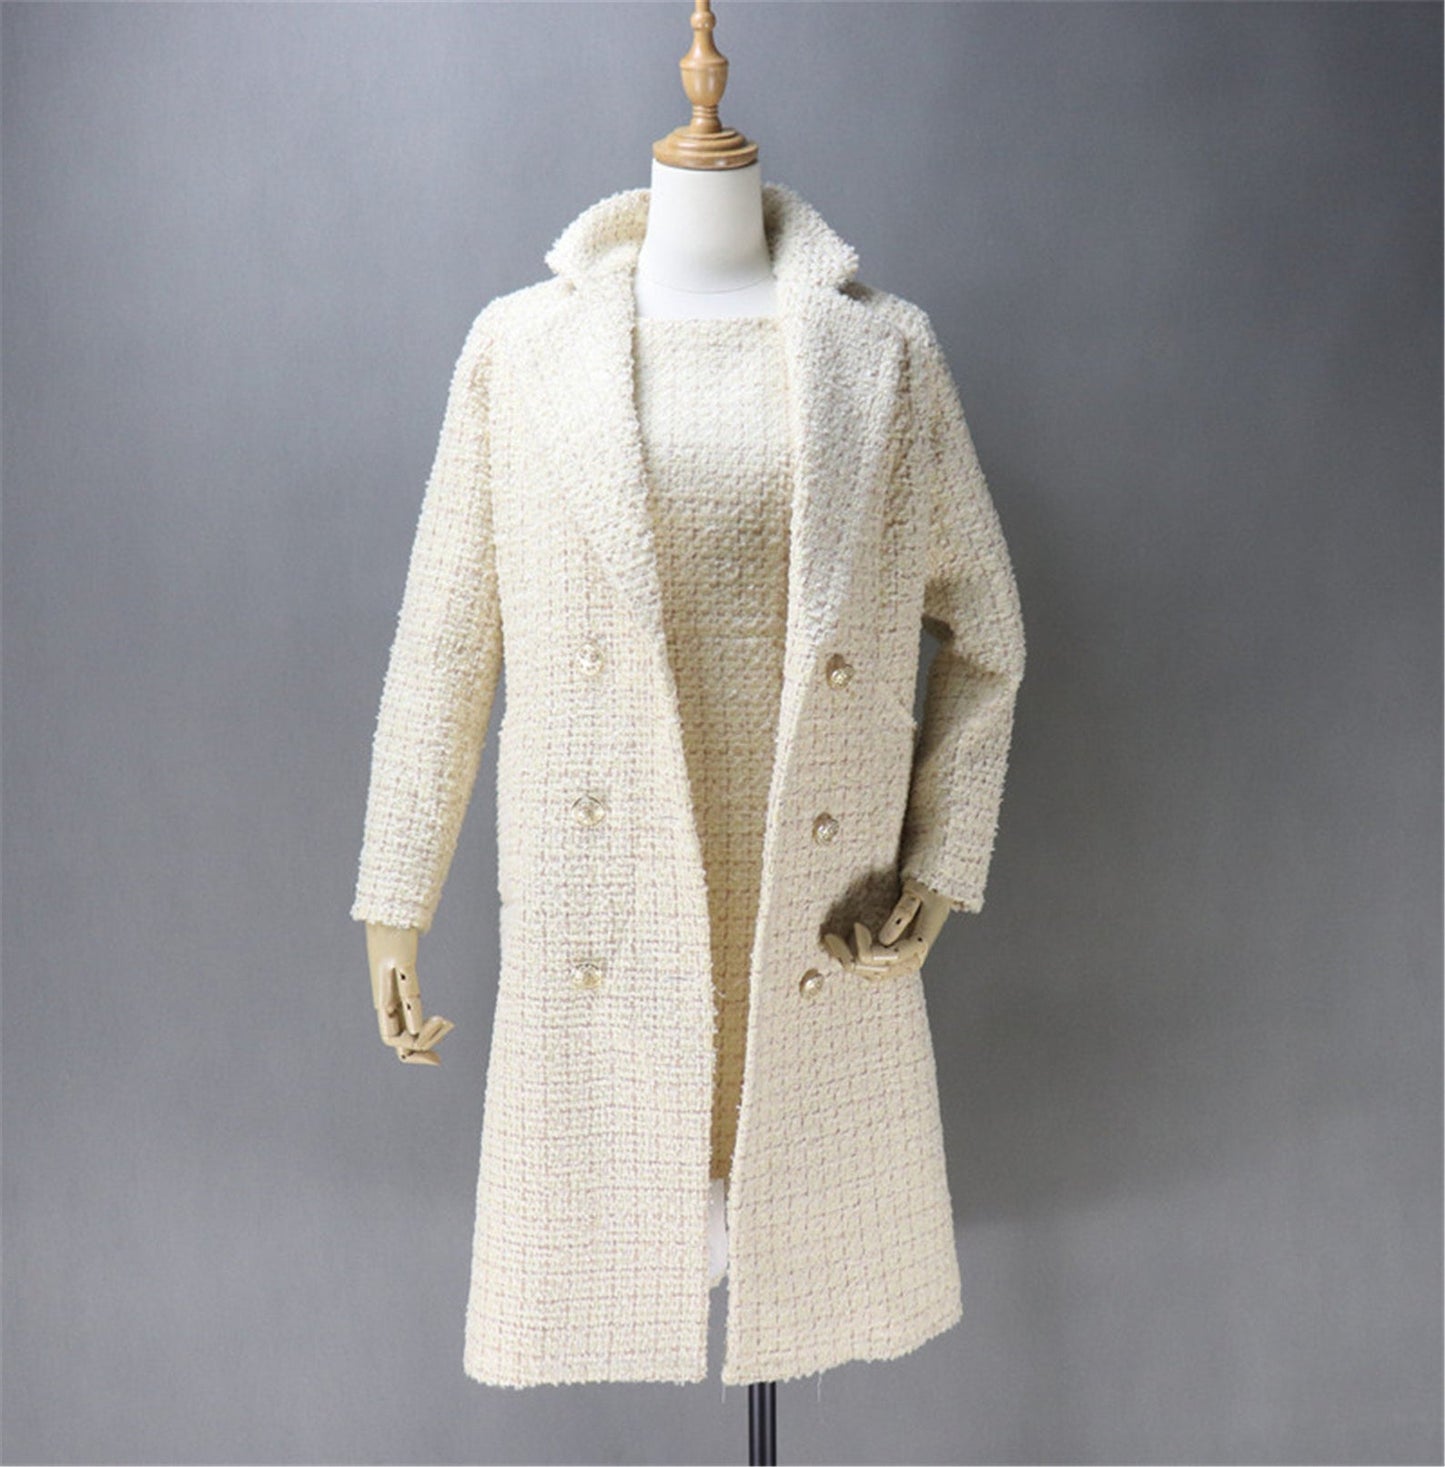 White Tweed Sheath Dress + Long Coat For Womens (20% discount)  "10 Pound Discount when you buy both Sheath Dress + Long Coat"   UK CUSTOMER SERVICE! White Tweed Sheath Dress + Long Coat For Womens (20% discount) - As per customer requirement, our tailor will make perfect Tweed fabric for you. This is all season dress, can wear for outside and functions.